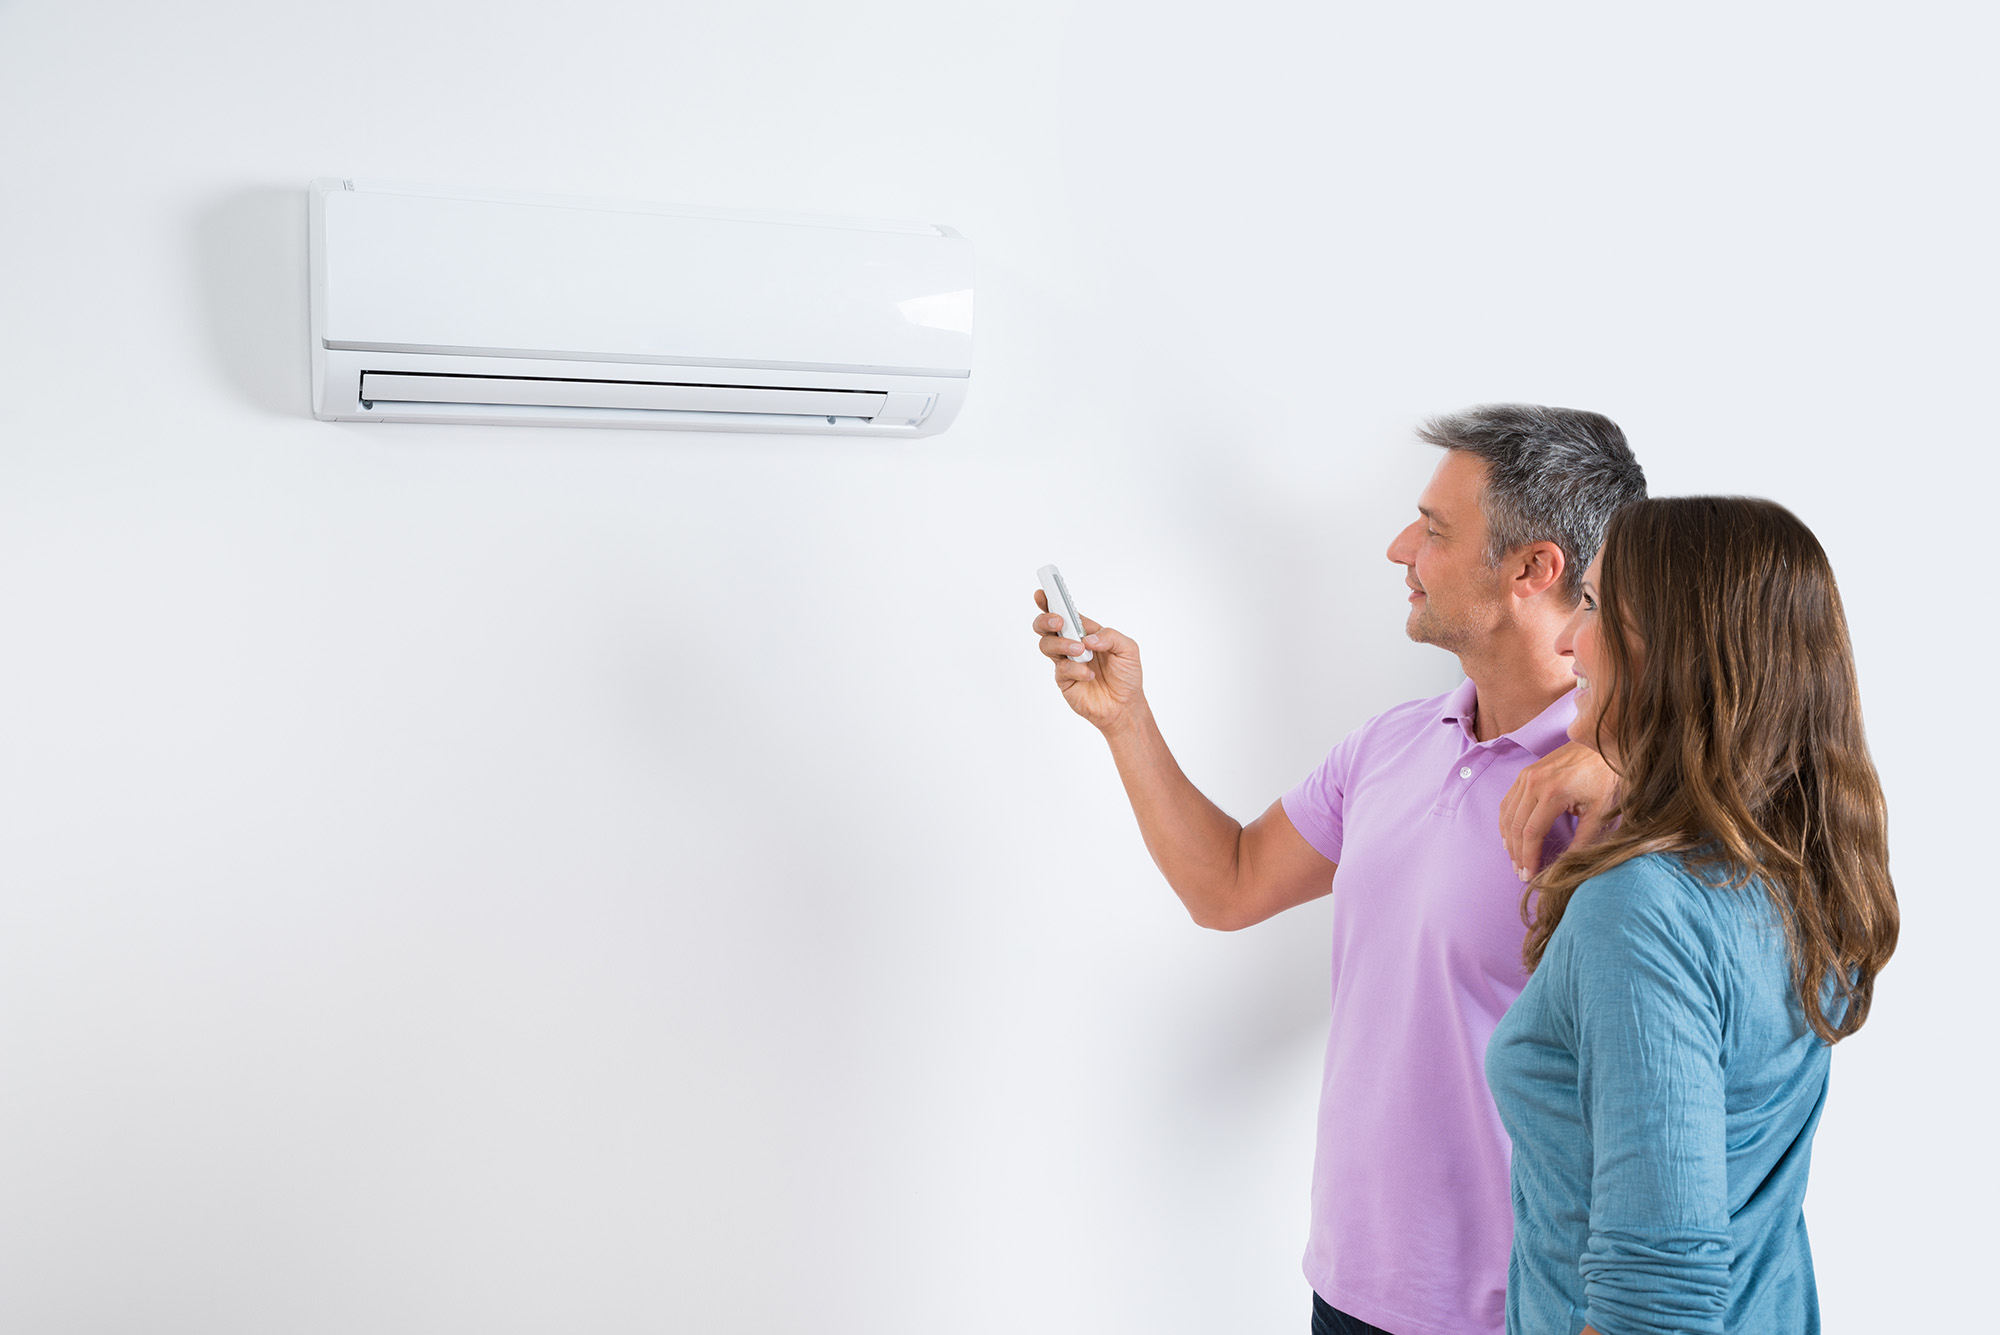 Mature Couple Standing In Front Of Air Conditioner And Adjusting The Temperature By Remote